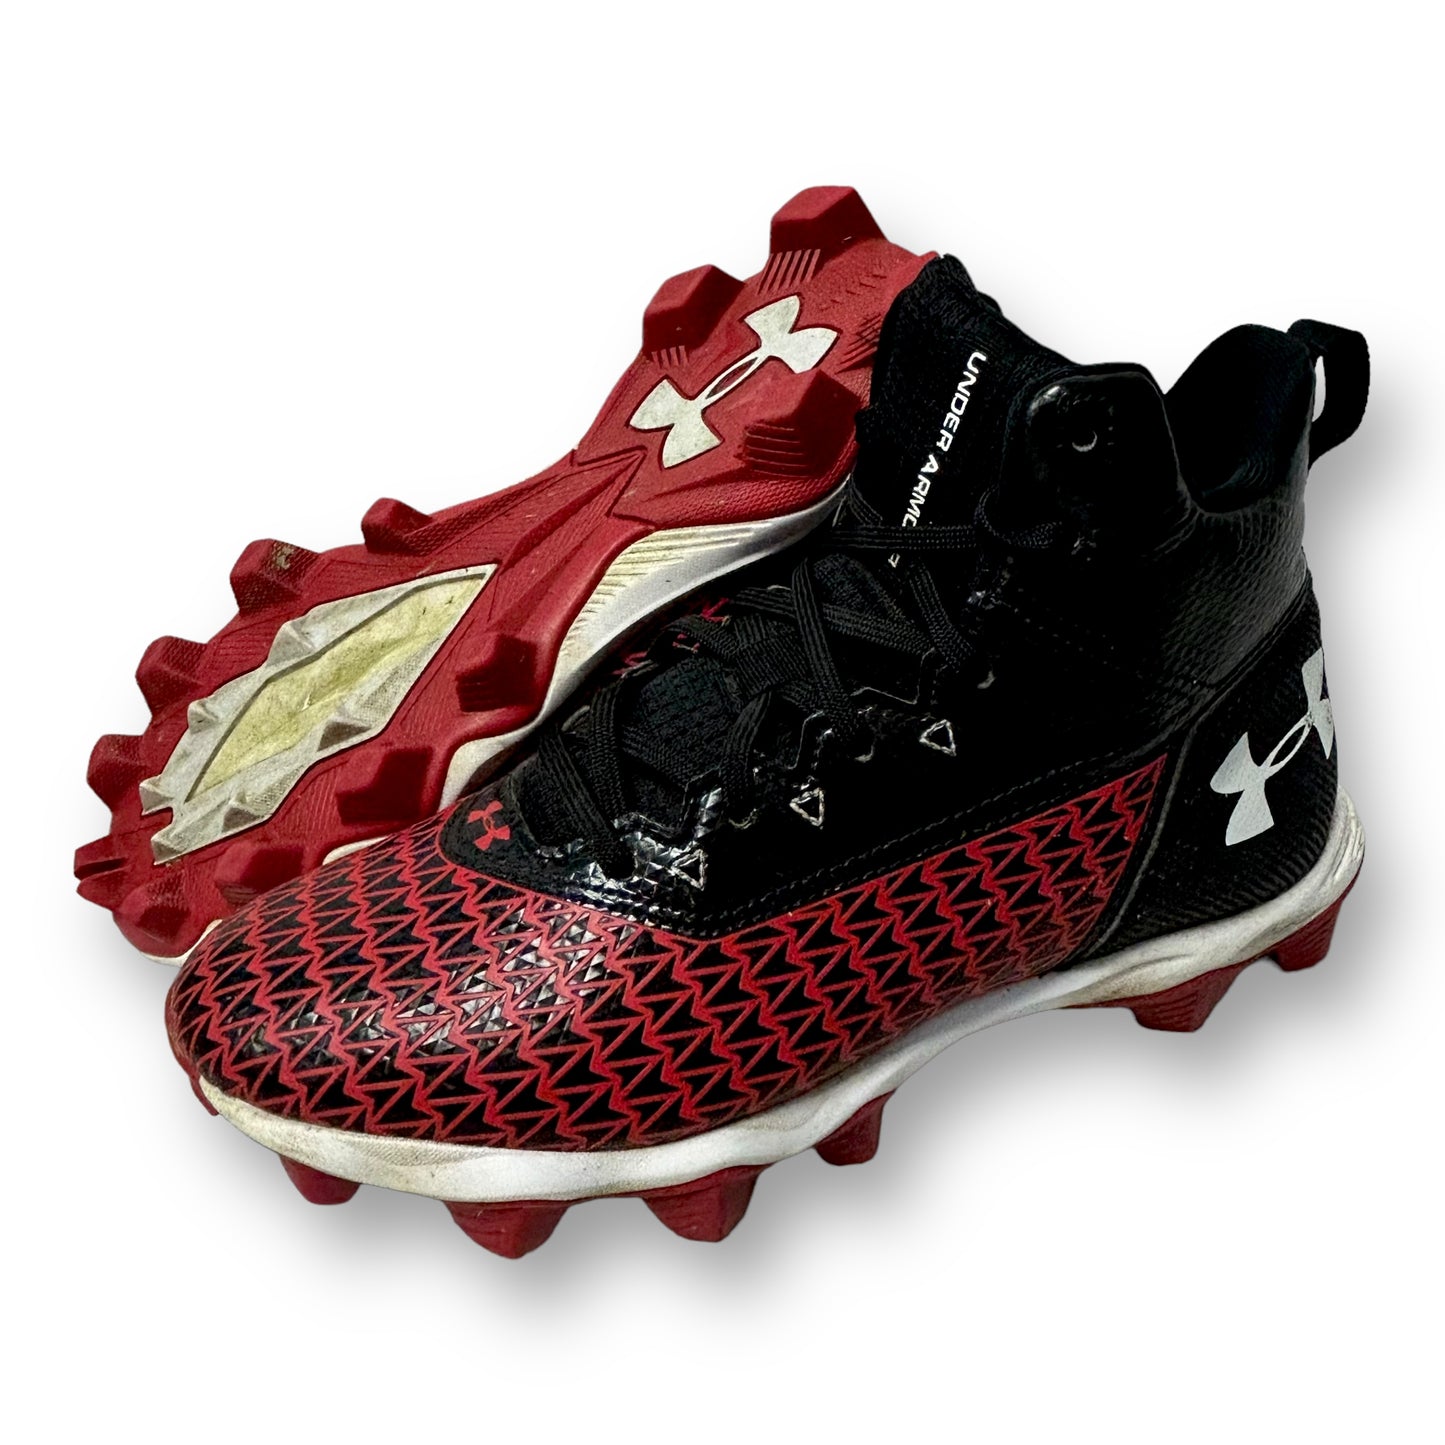 Under Armour Hammer Jr Youth Boy Size 5 Youth Red & Black Football Cleats